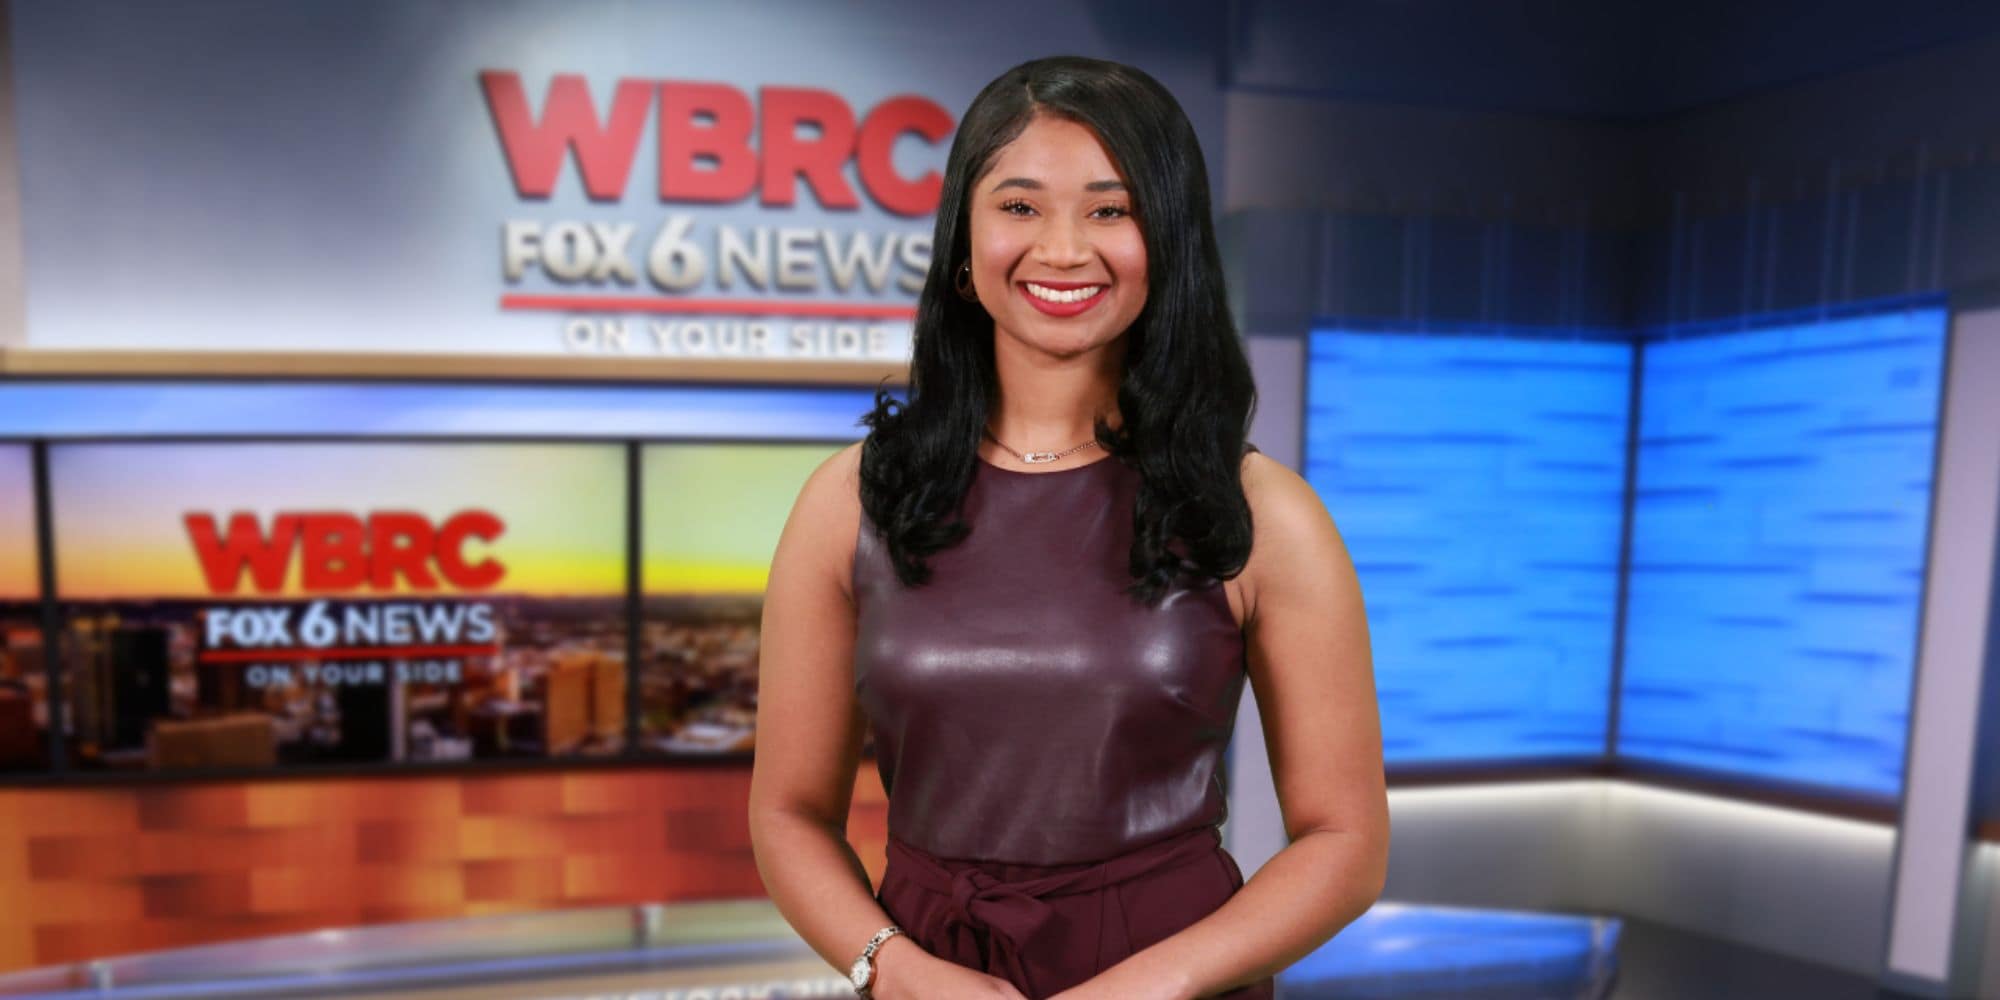 Dual Enrollment student Tonia Brown on the set of WBRC Fox 6 News studies Meteorology which includes a minor in Communications and Broadcast Media. 